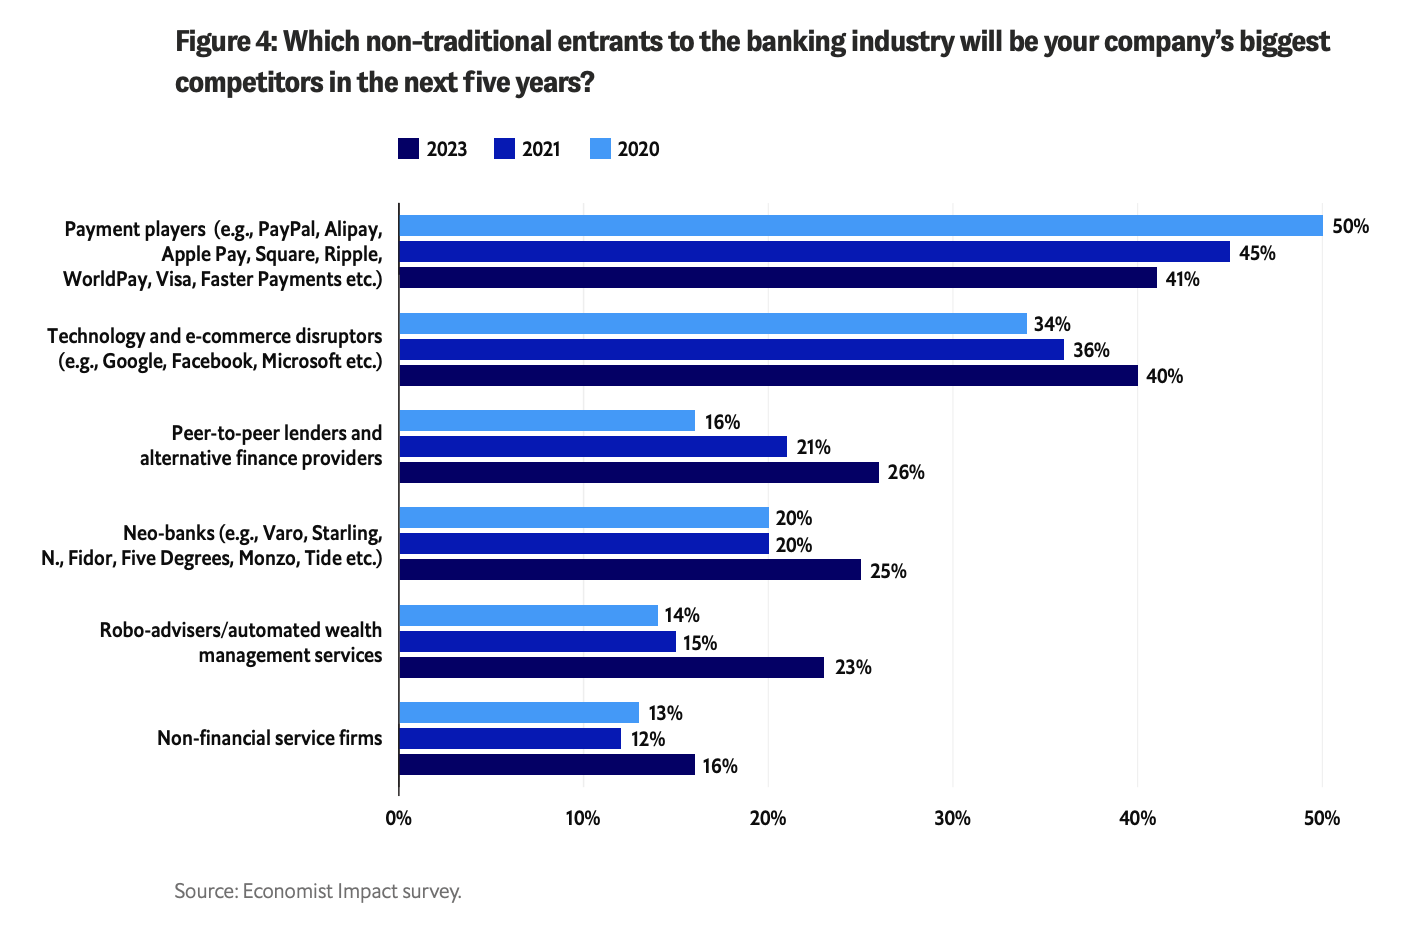 Which non-traditional entrants to the banking industry will be your company’s biggest competitors in the next five years?